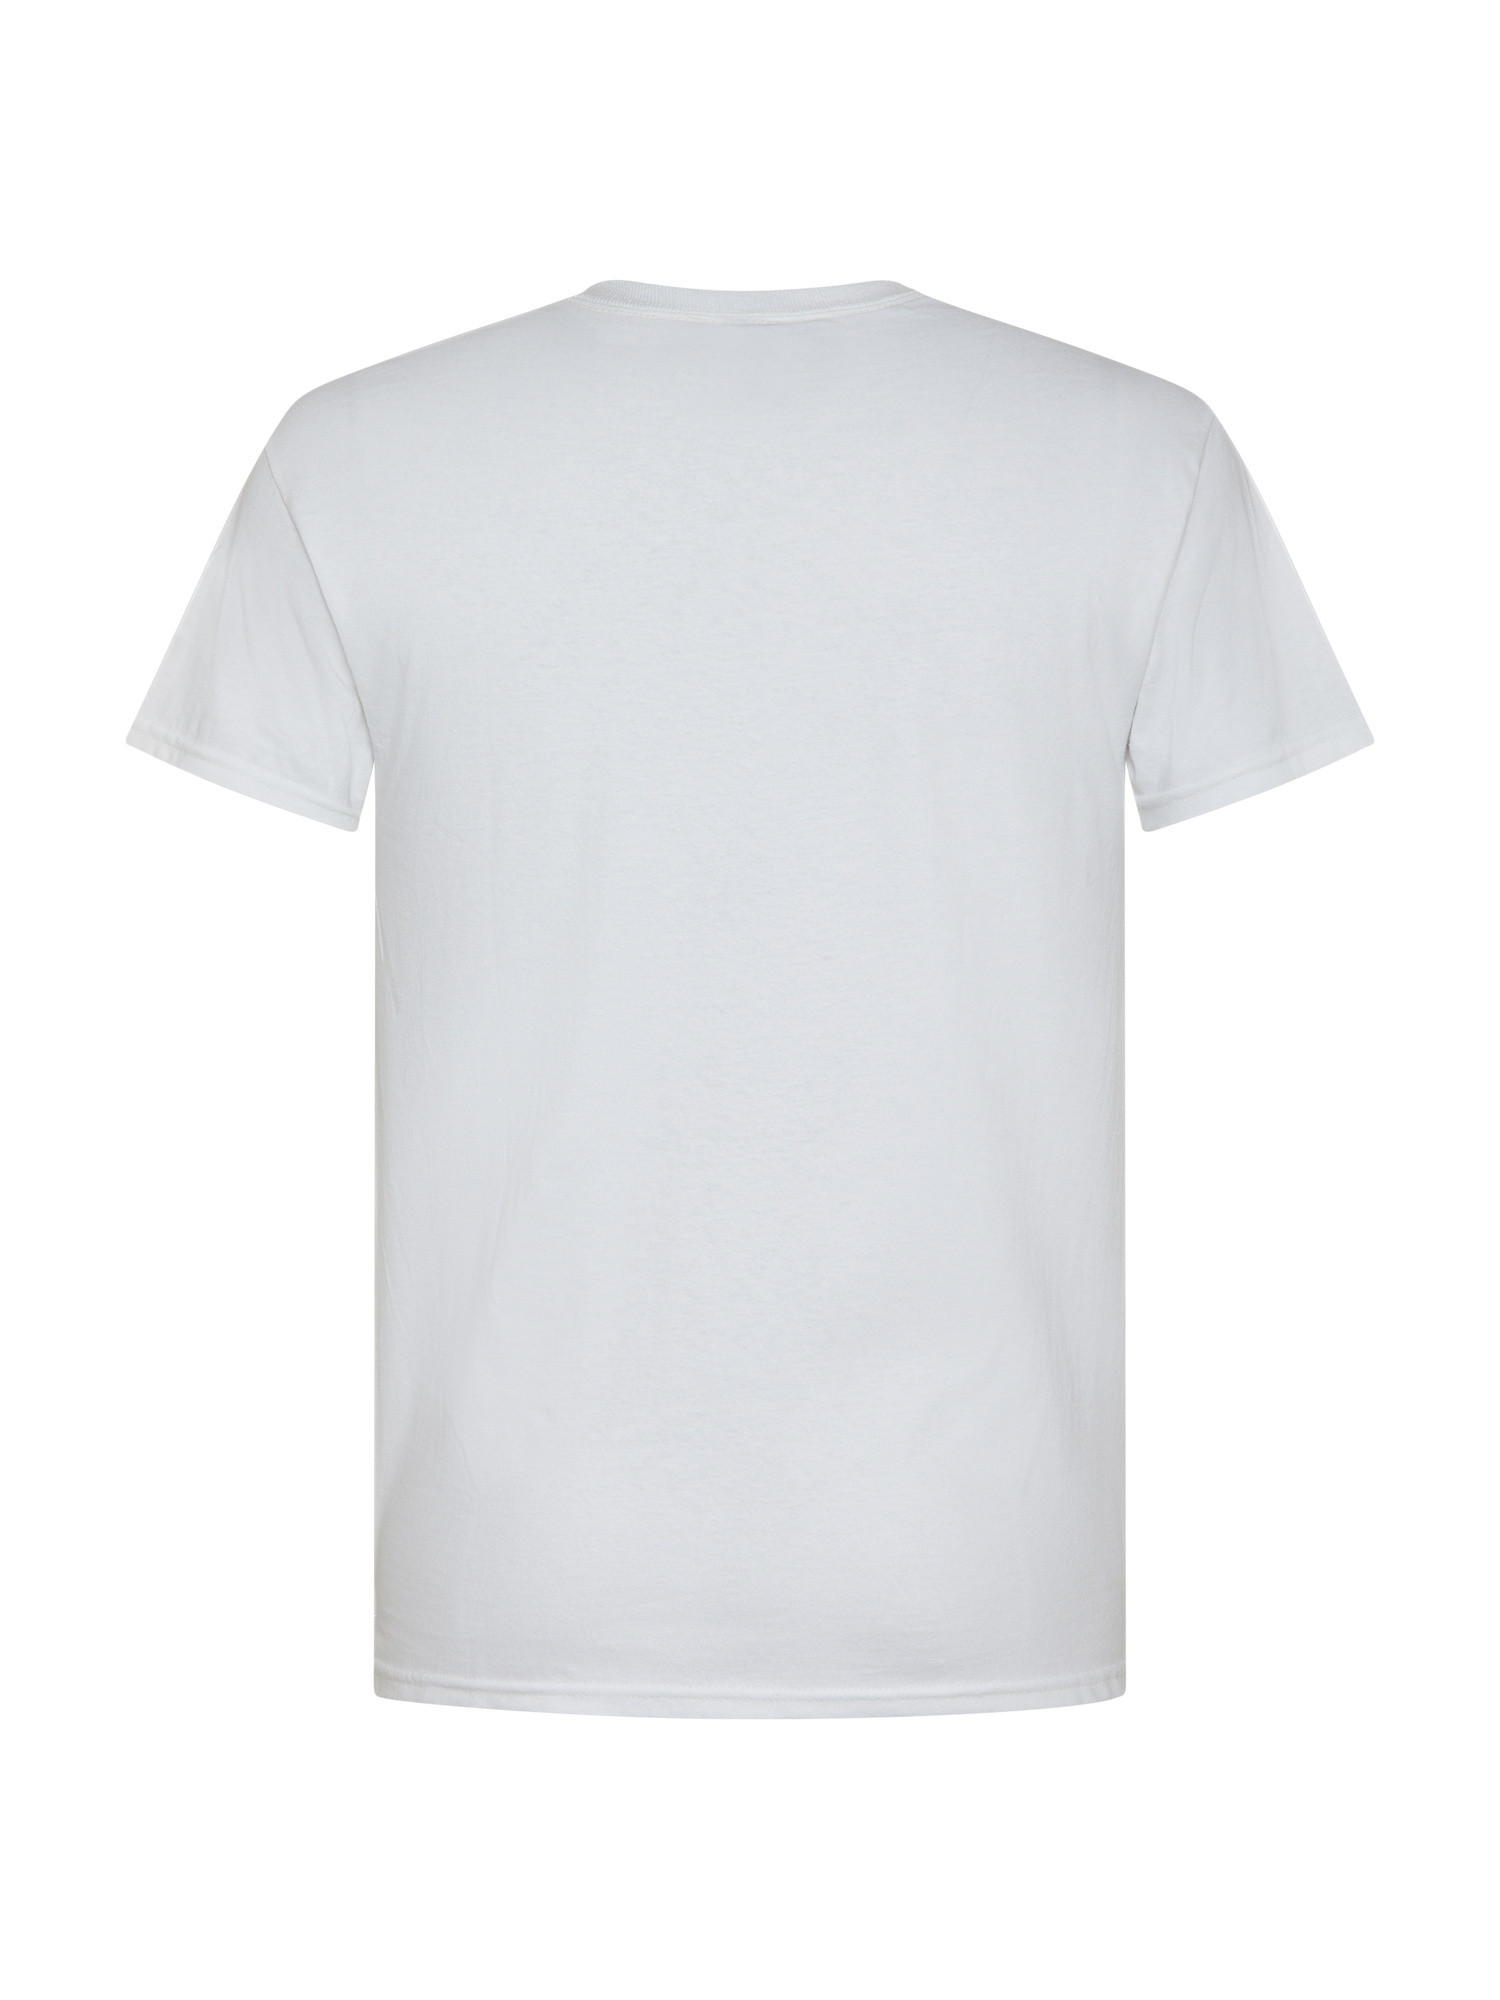 Thrasher - T-Shirt con logo outlined, Bianco, large image number 1